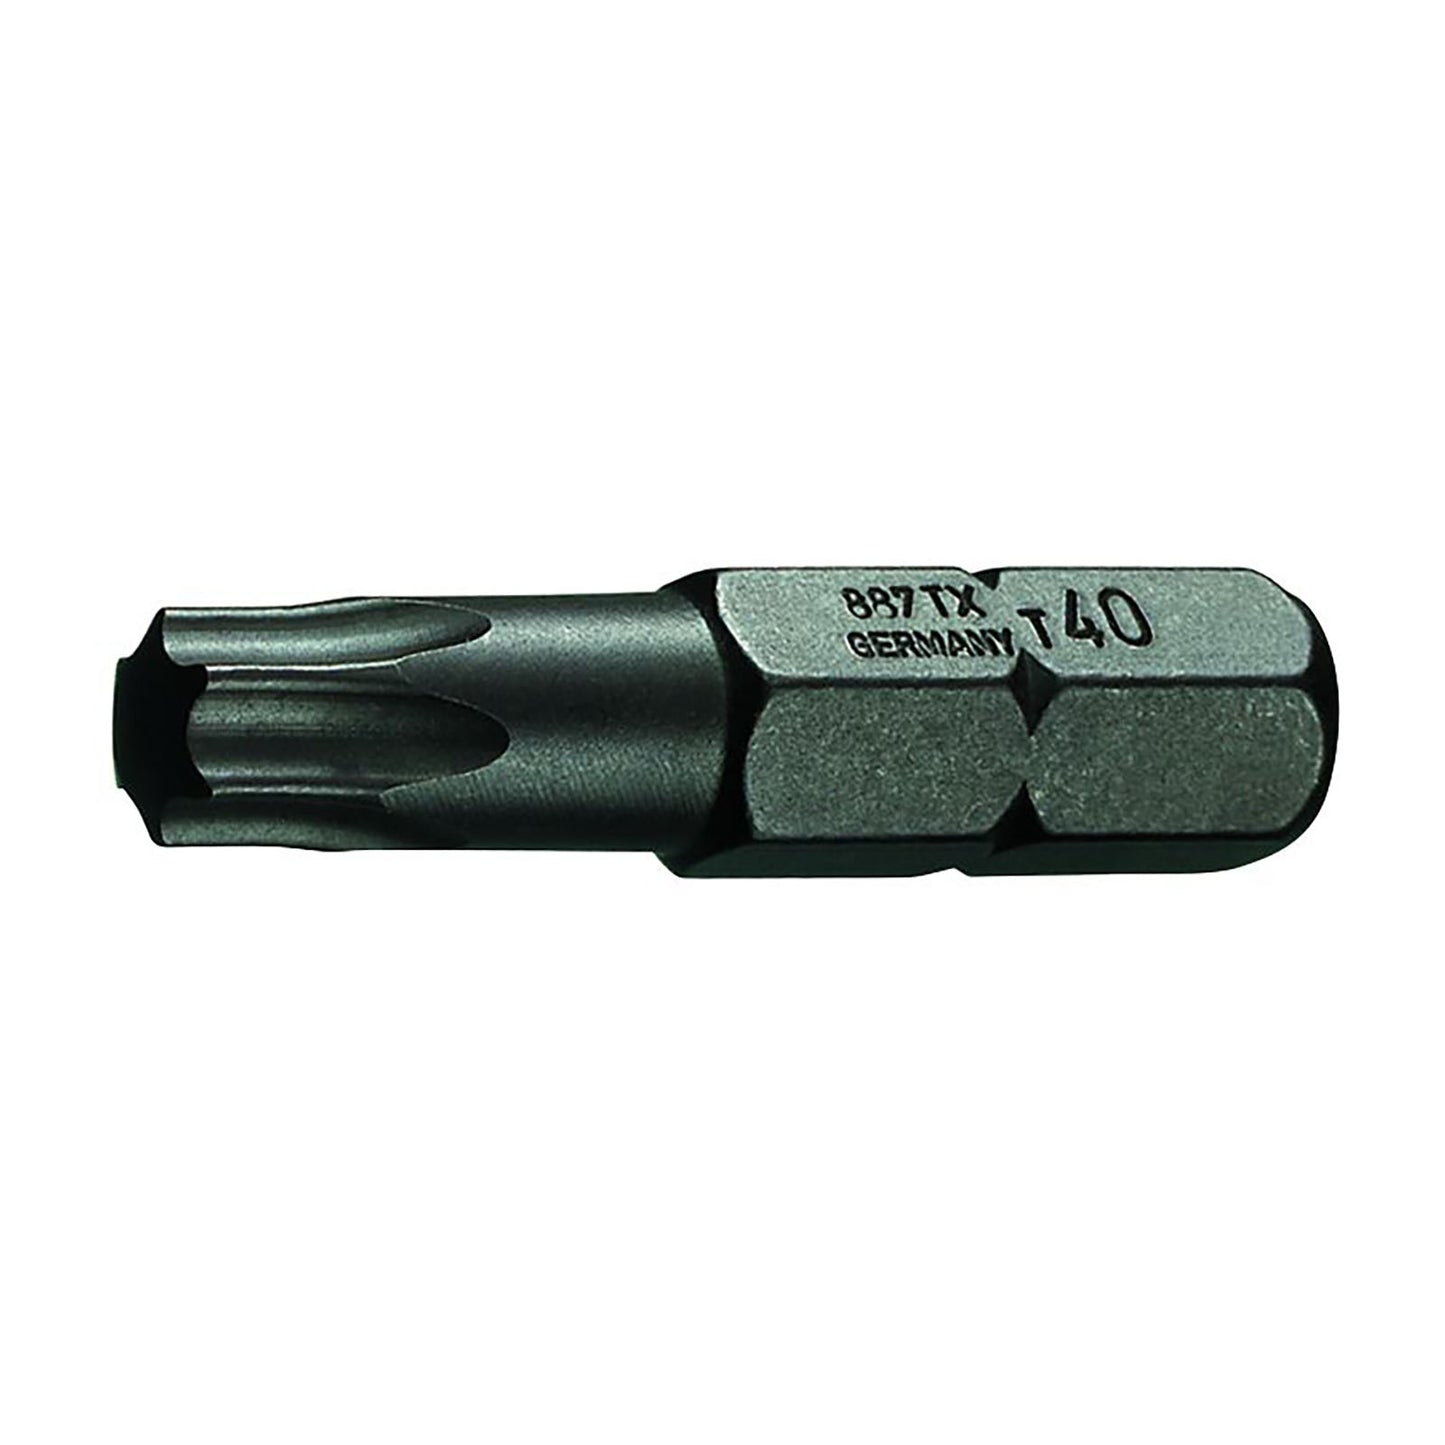 GEDORE 687 TX T27 S-010 - Embout TORX® 1/4", T27 (6542720)